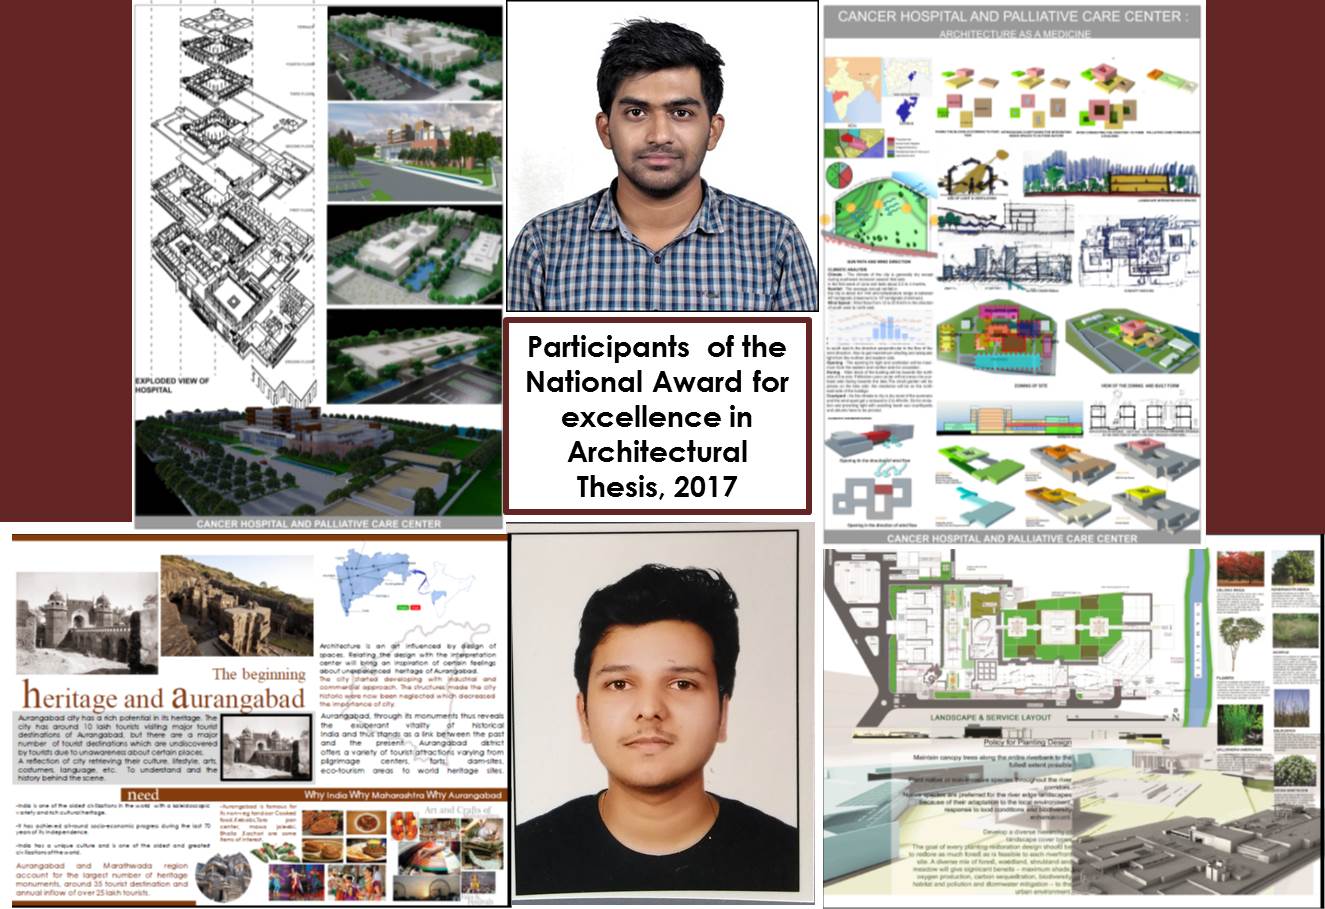 National Award for excellence in Architectural Thesis